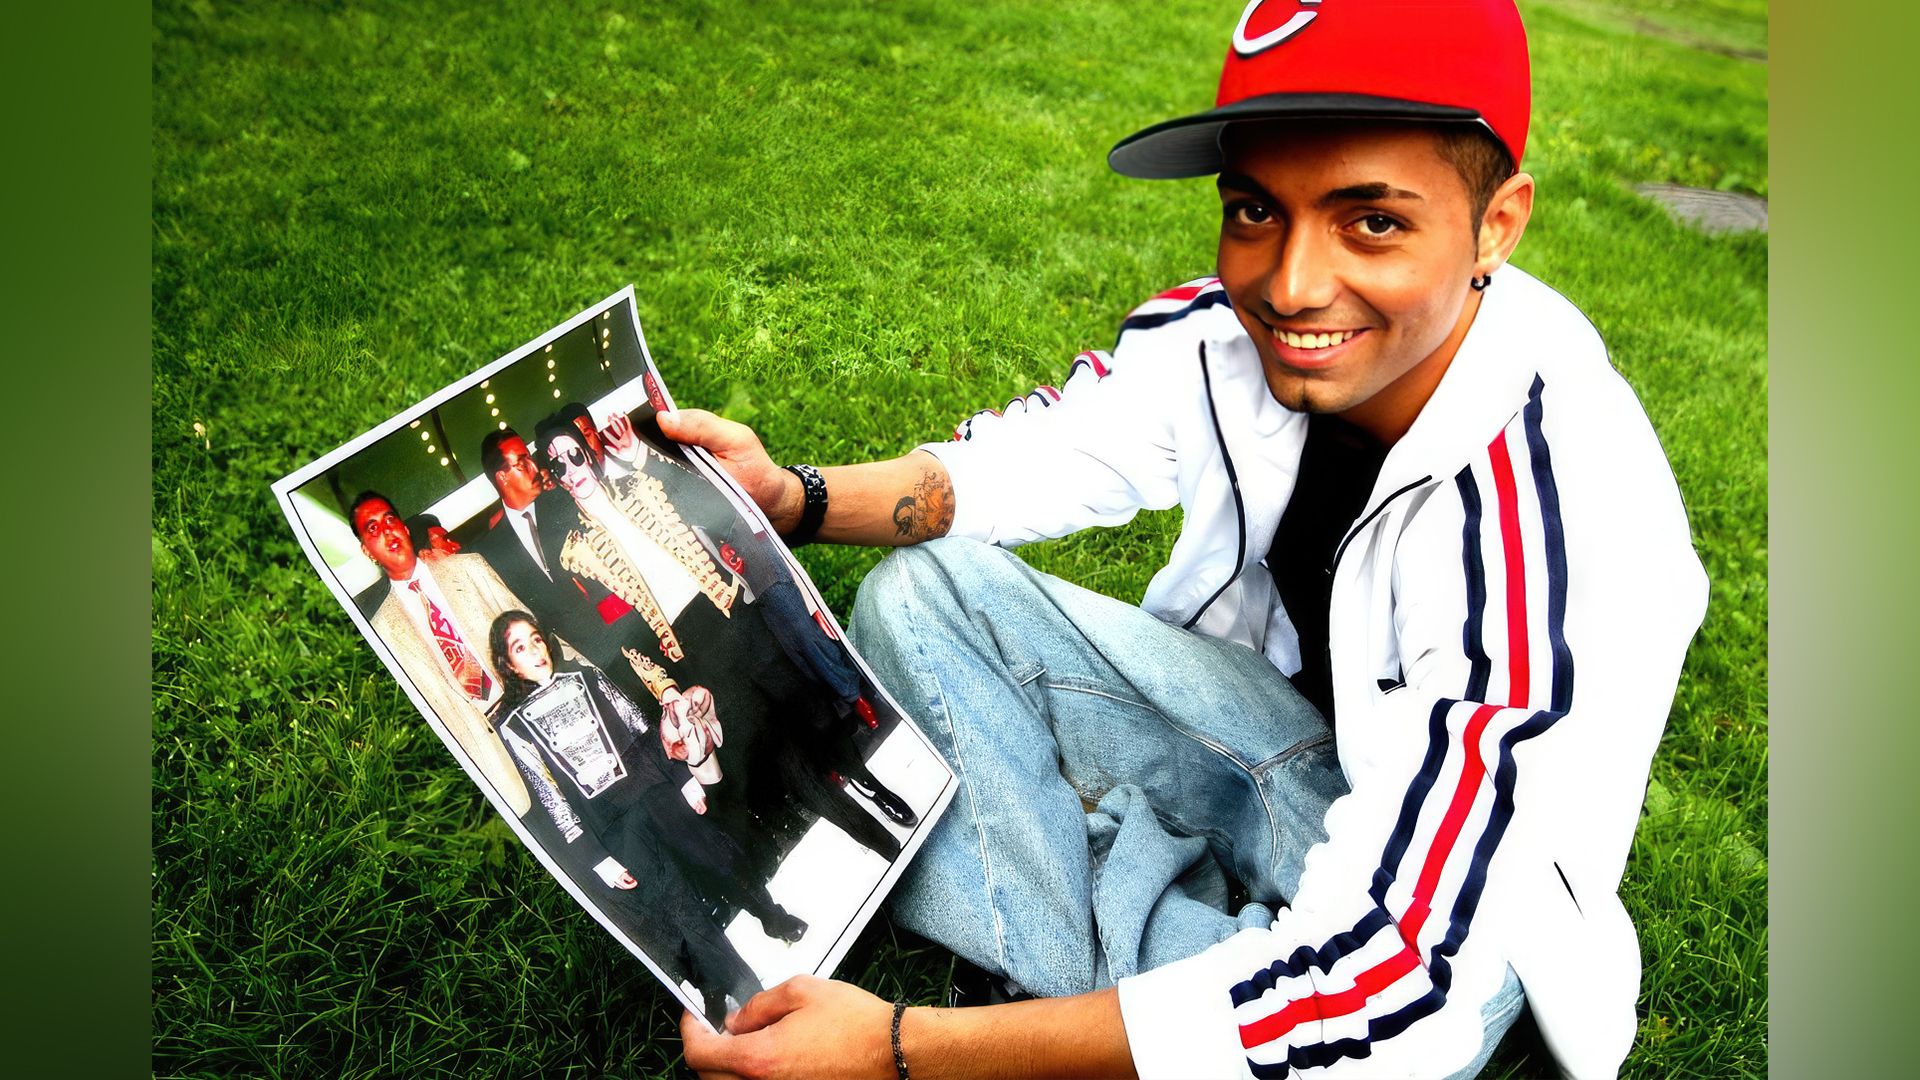 Omer Bhatti, Michael Jackson's old friend and fan